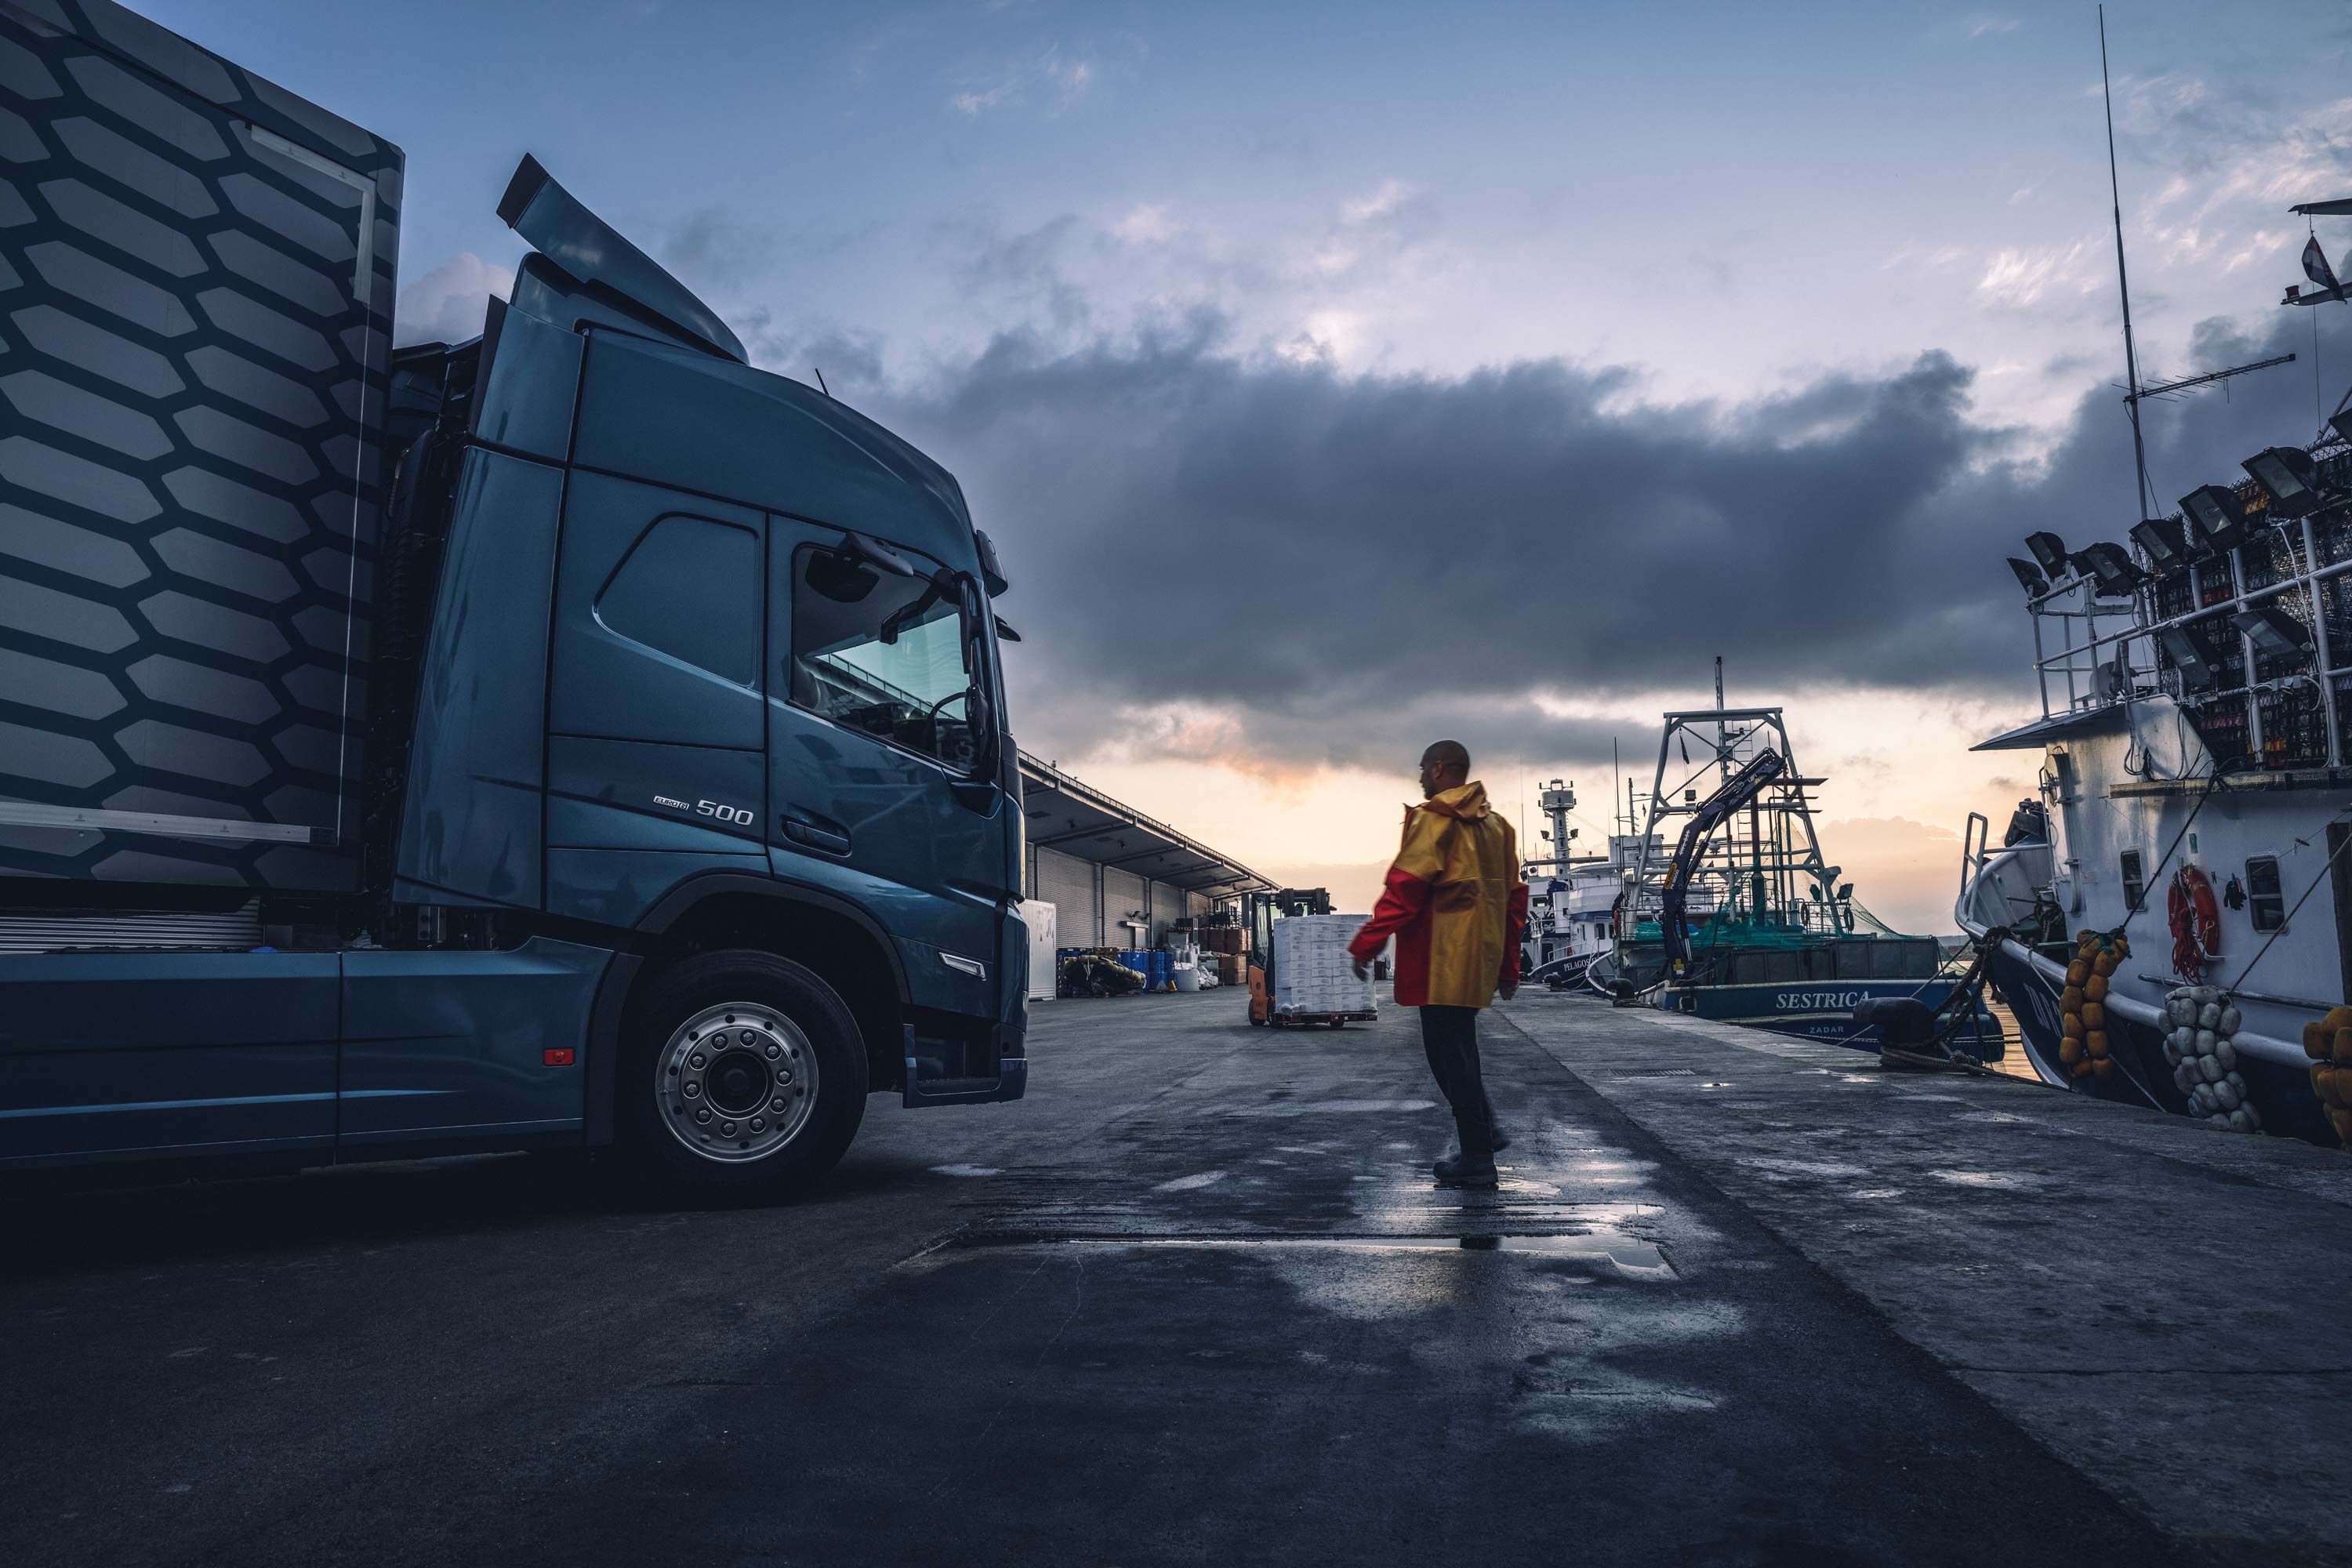 The Volvo FM sets a new standard for cabs